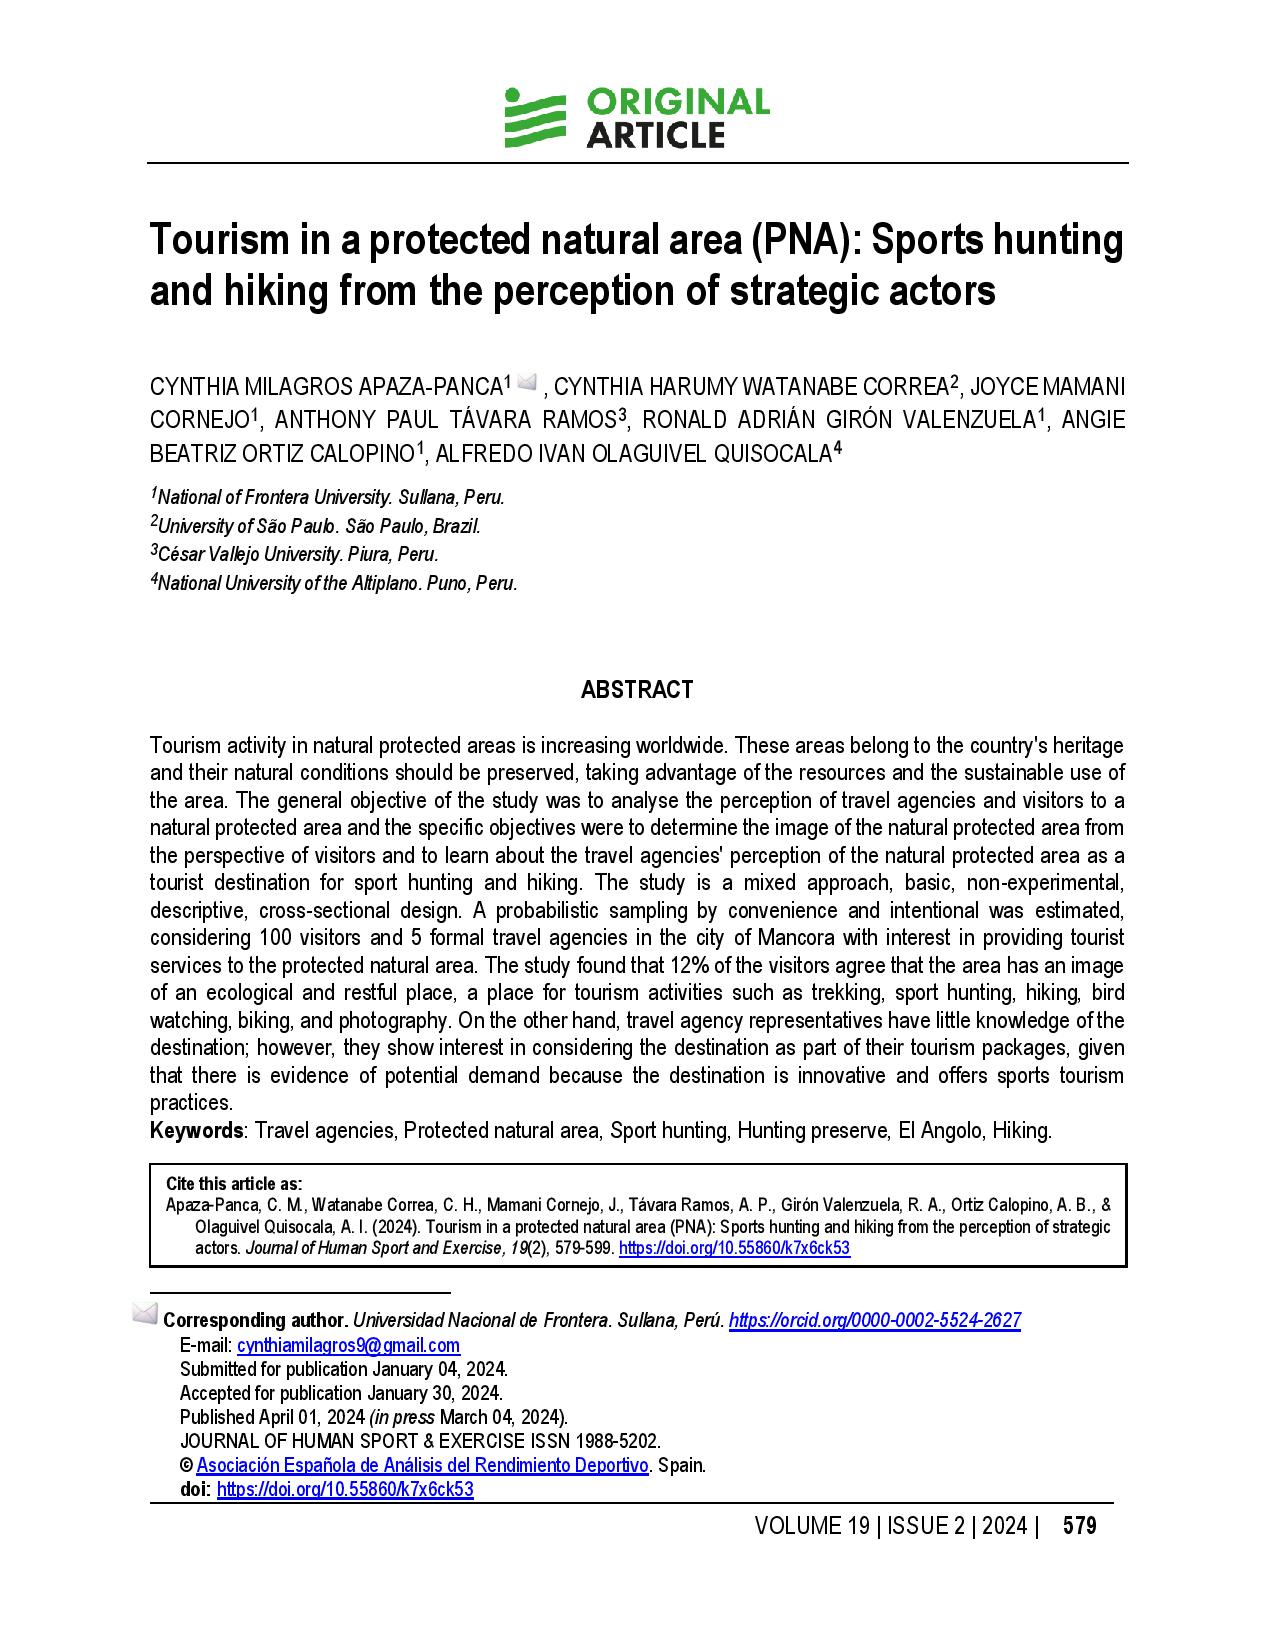 Tourism in a protected natural area (PNA): Sports hunting and hiking from the perception of strategic actors